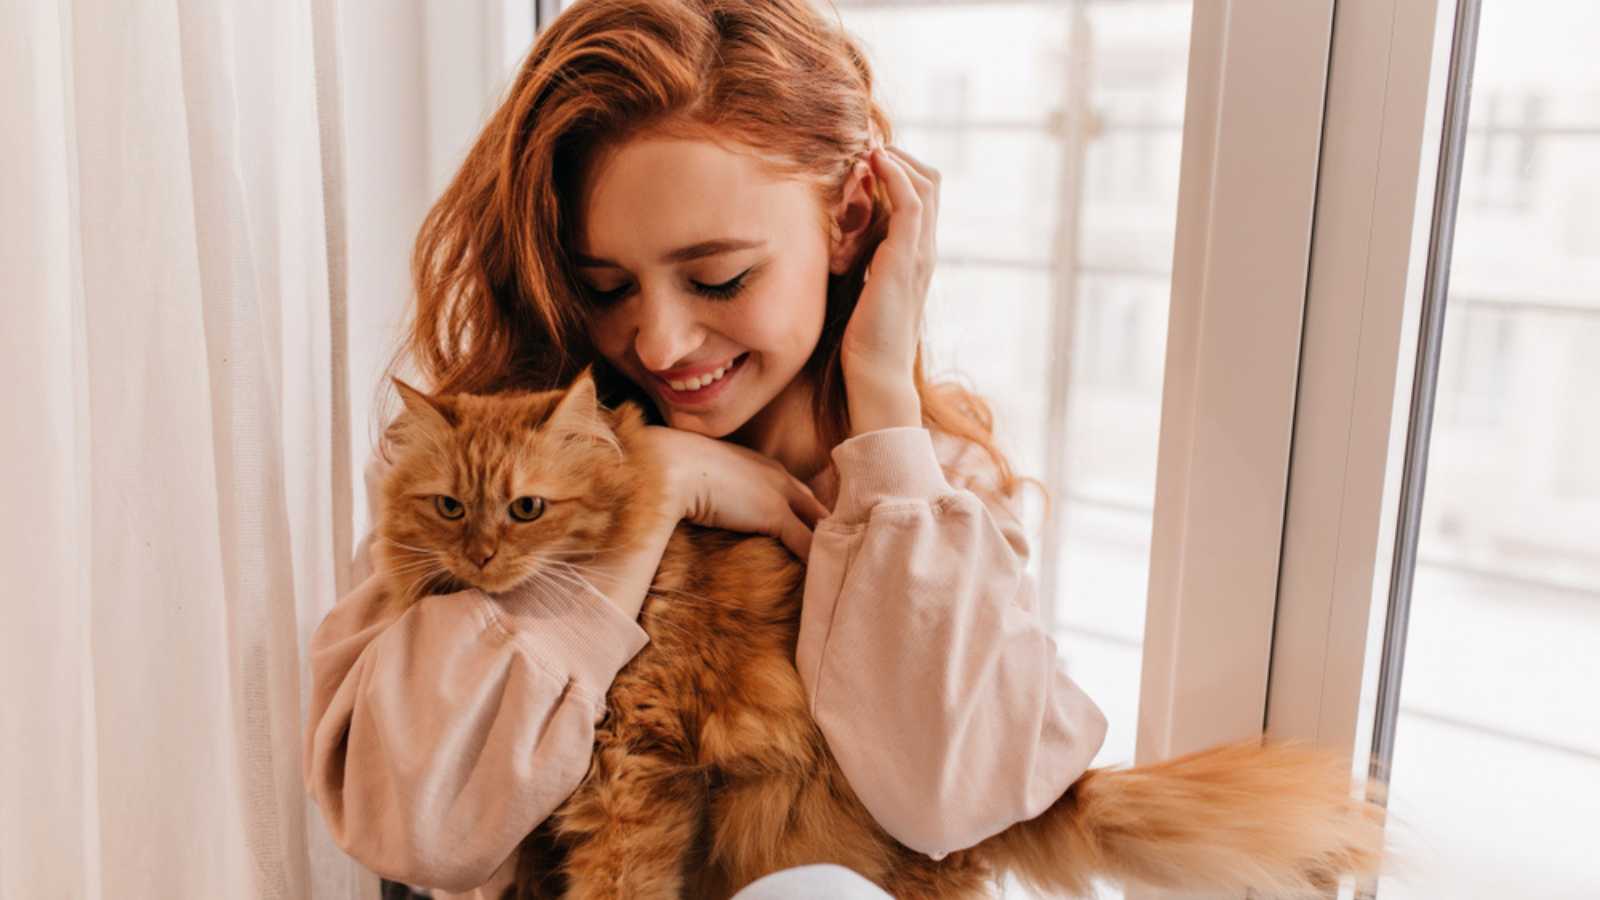 Woman With Pet